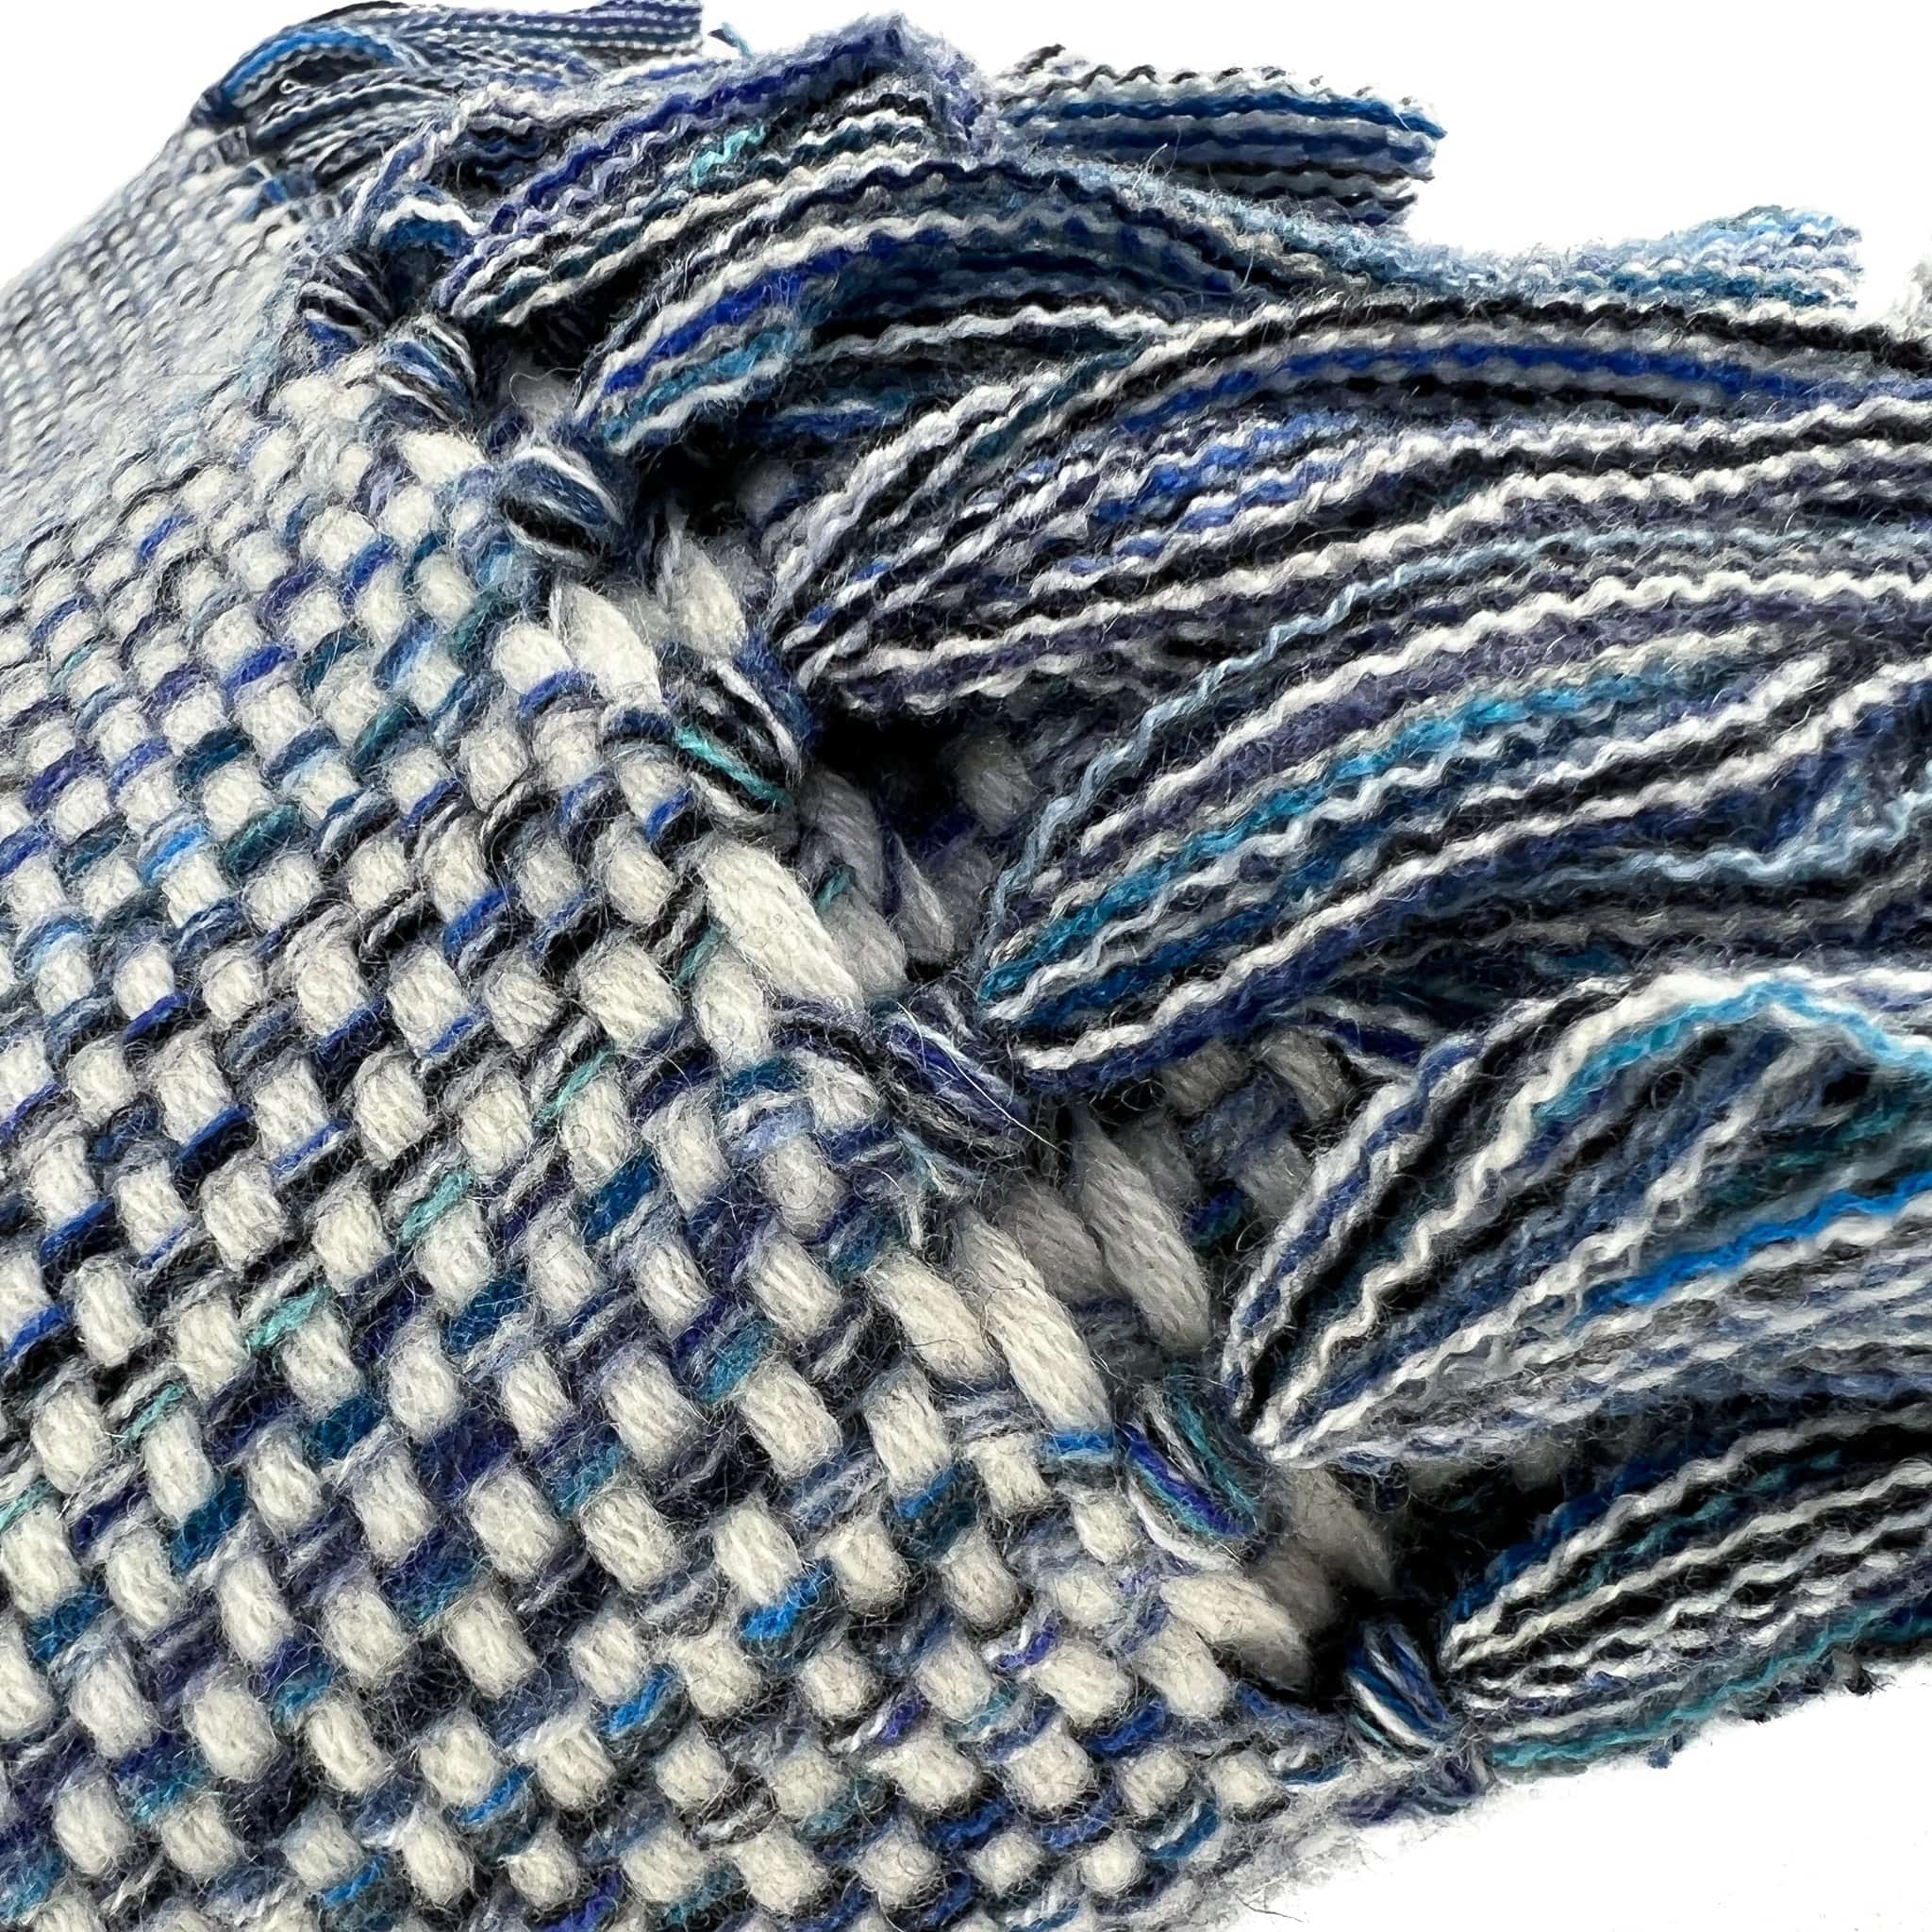 Close-up of an An Italian made Cashmere throw with a white weft and different shades of blue warp, folded on a white background, with hand knotted multiple shades of blue tassels showing in front